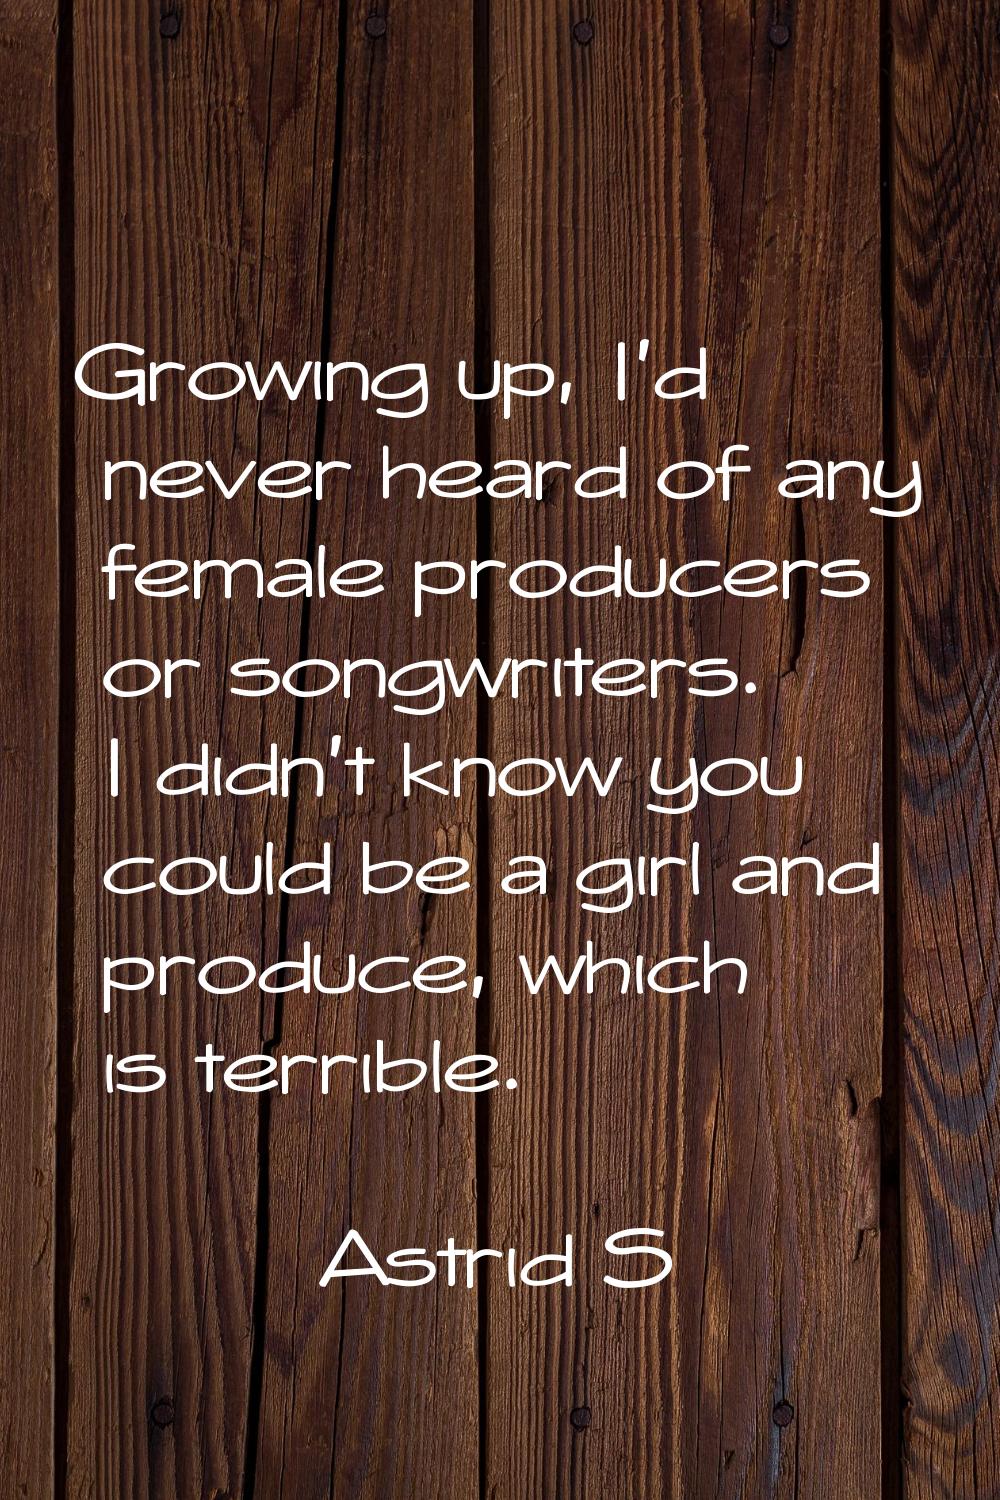 Growing up, I'd never heard of any female producers or songwriters. I didn't know you could be a gi